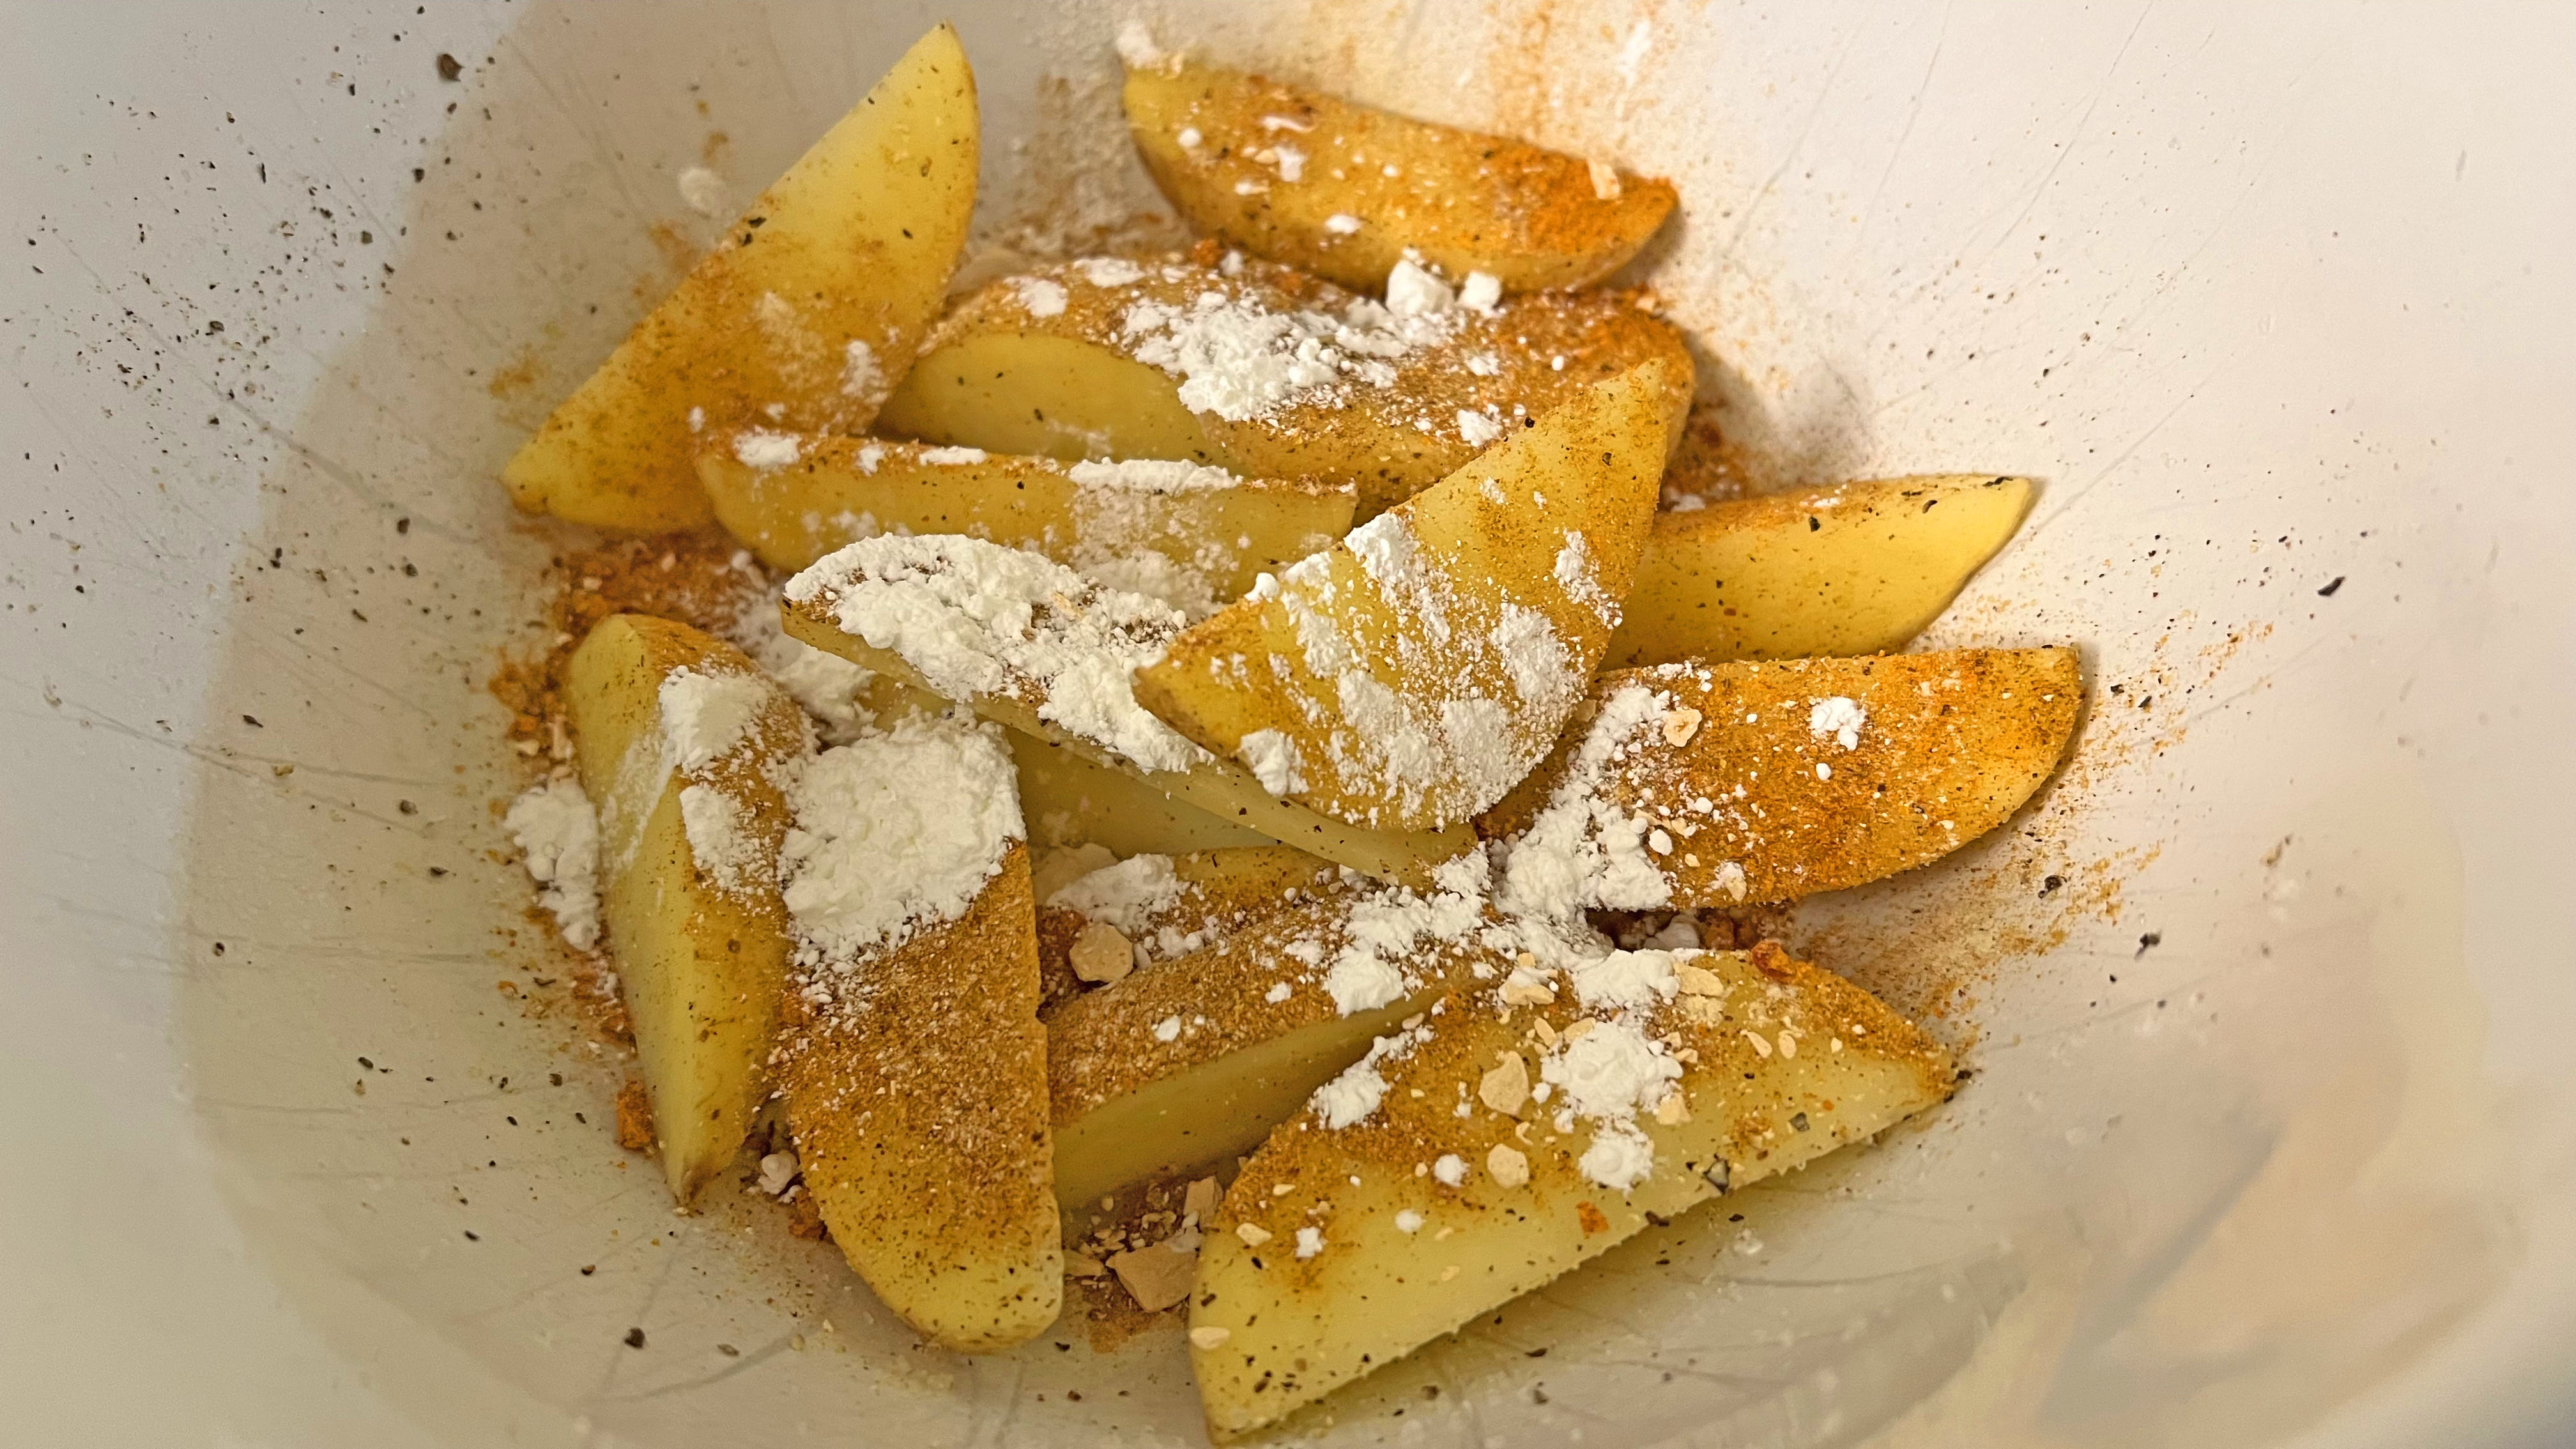 Season the potatoes in a bowl with cornstarch, salt and pepper, and paprika seasoning